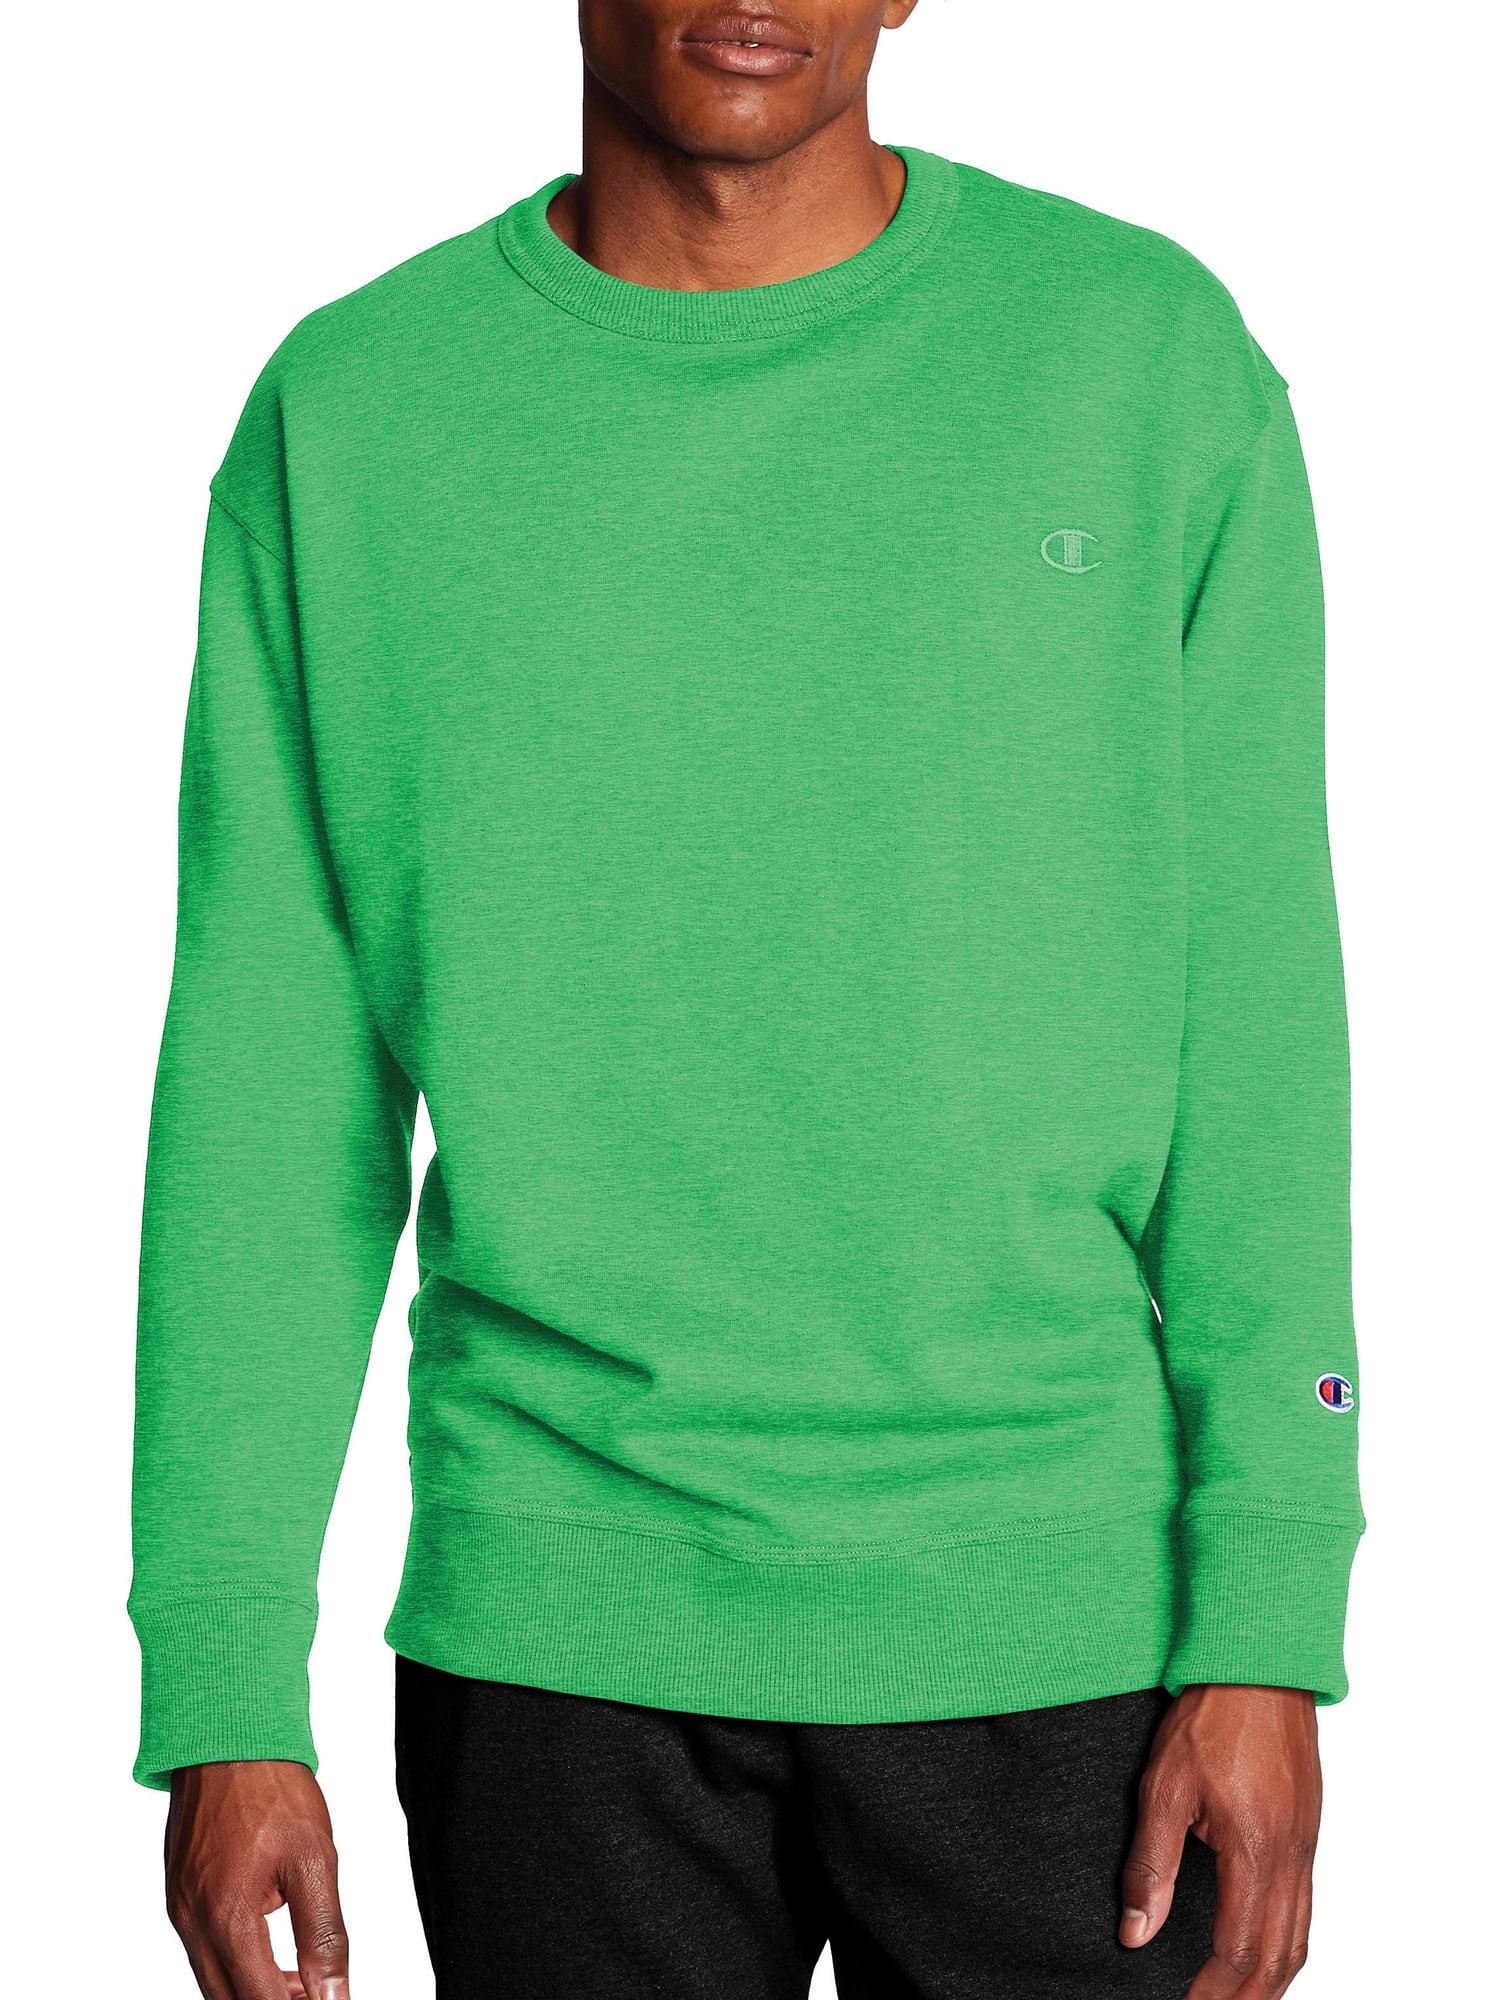 Adult Soft and Cozy Crewneck Sweatshirts in 28 Colors in Sizes S-4XL 